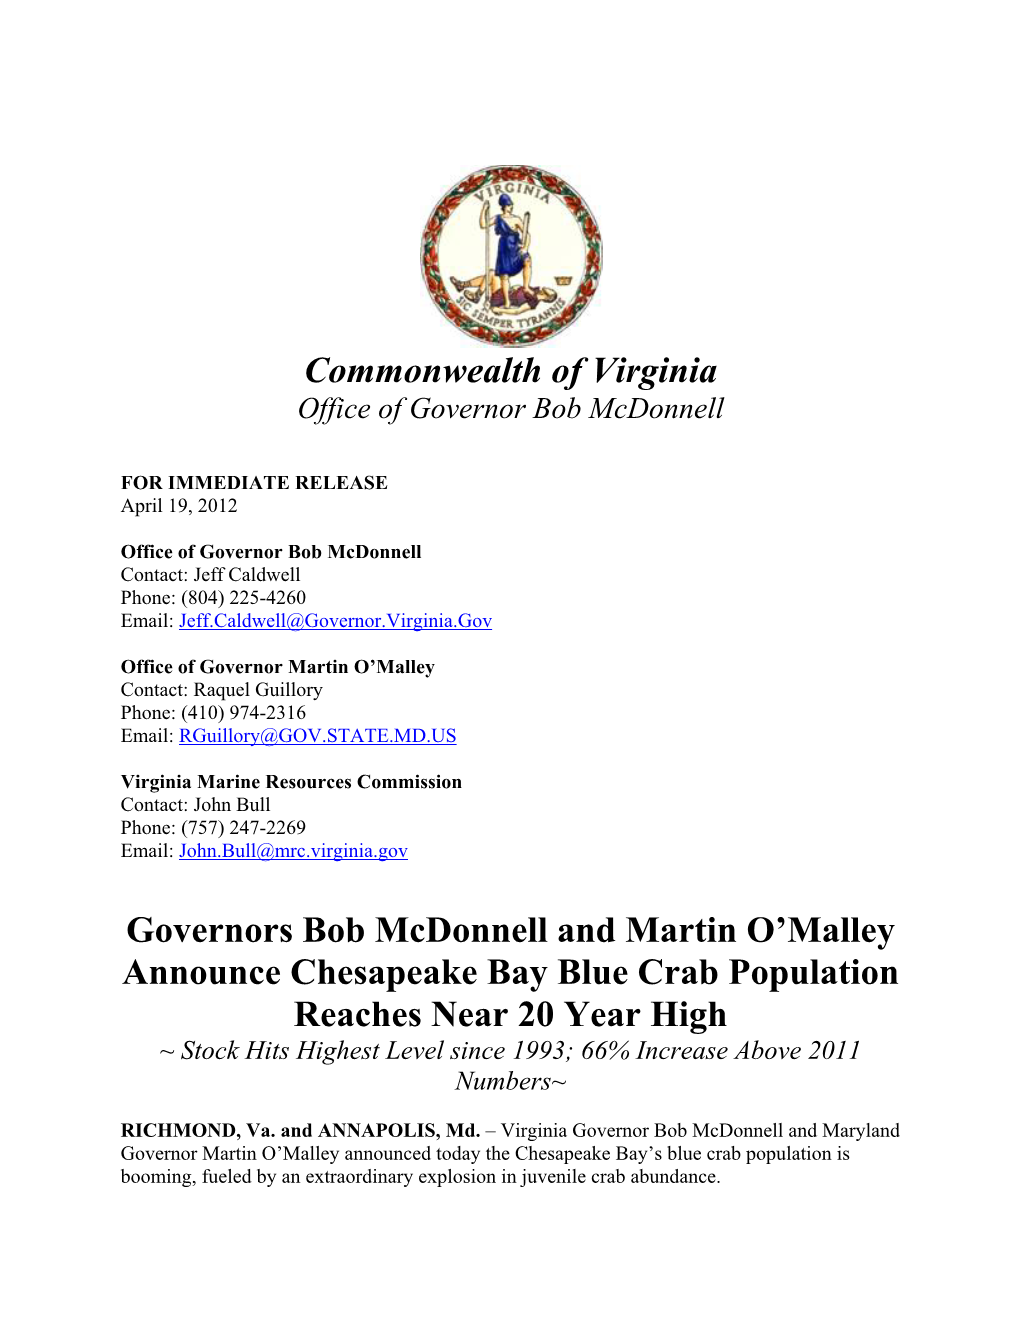 Commonwealth of Virginia Governors Bob Mcdonnell and Martin O'malley